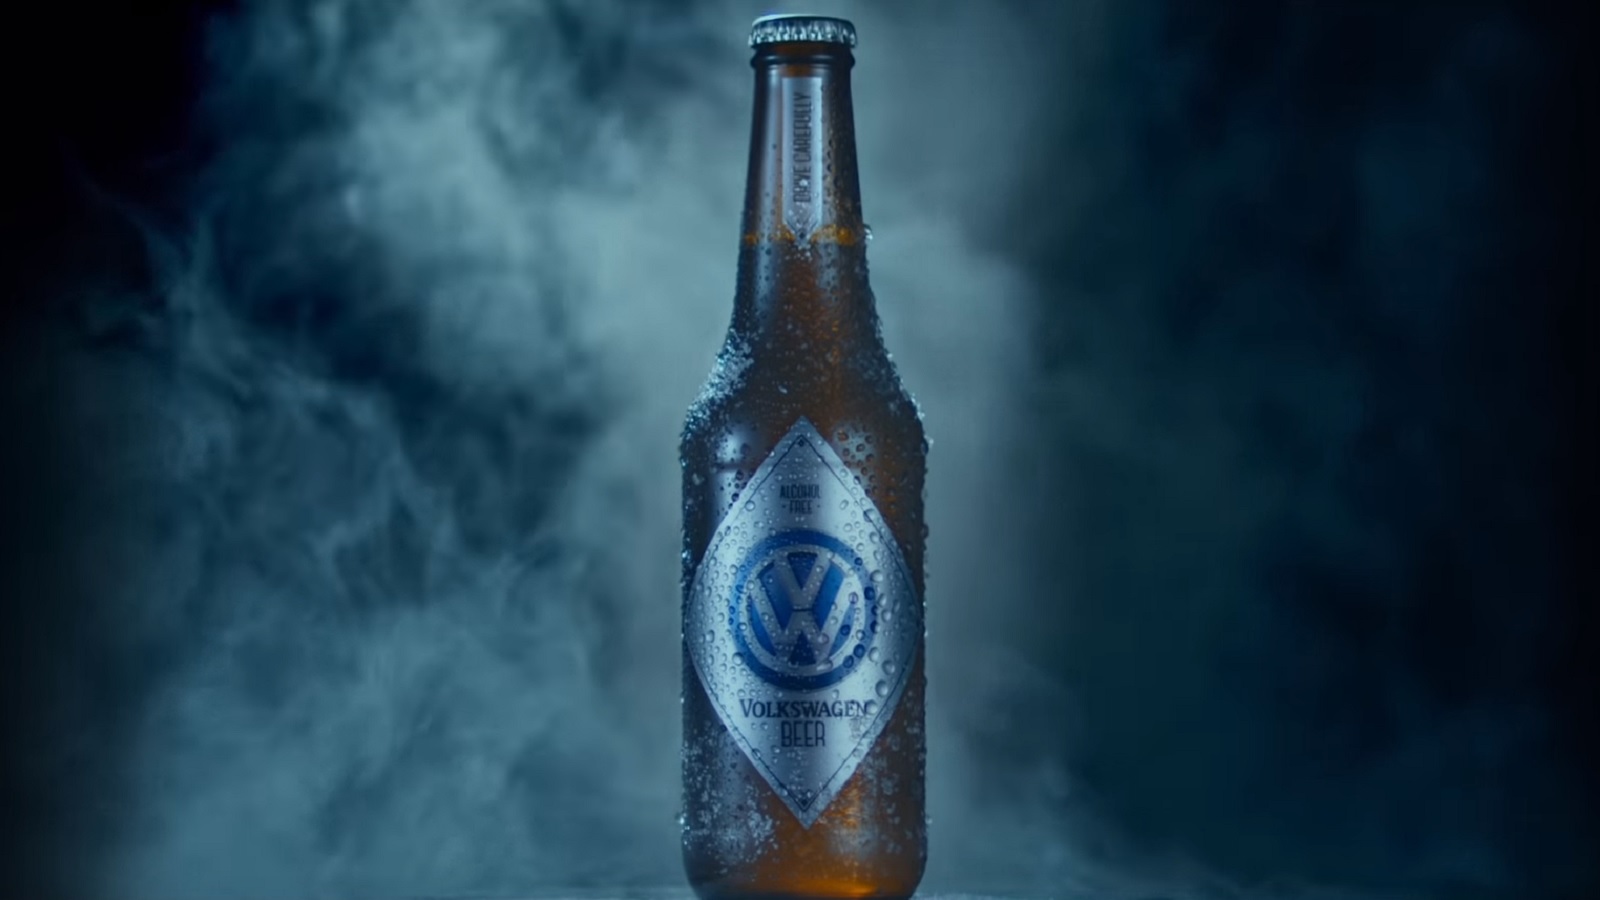 VW’s Non-Alcoholic Beer Is Both Tasty and Safe